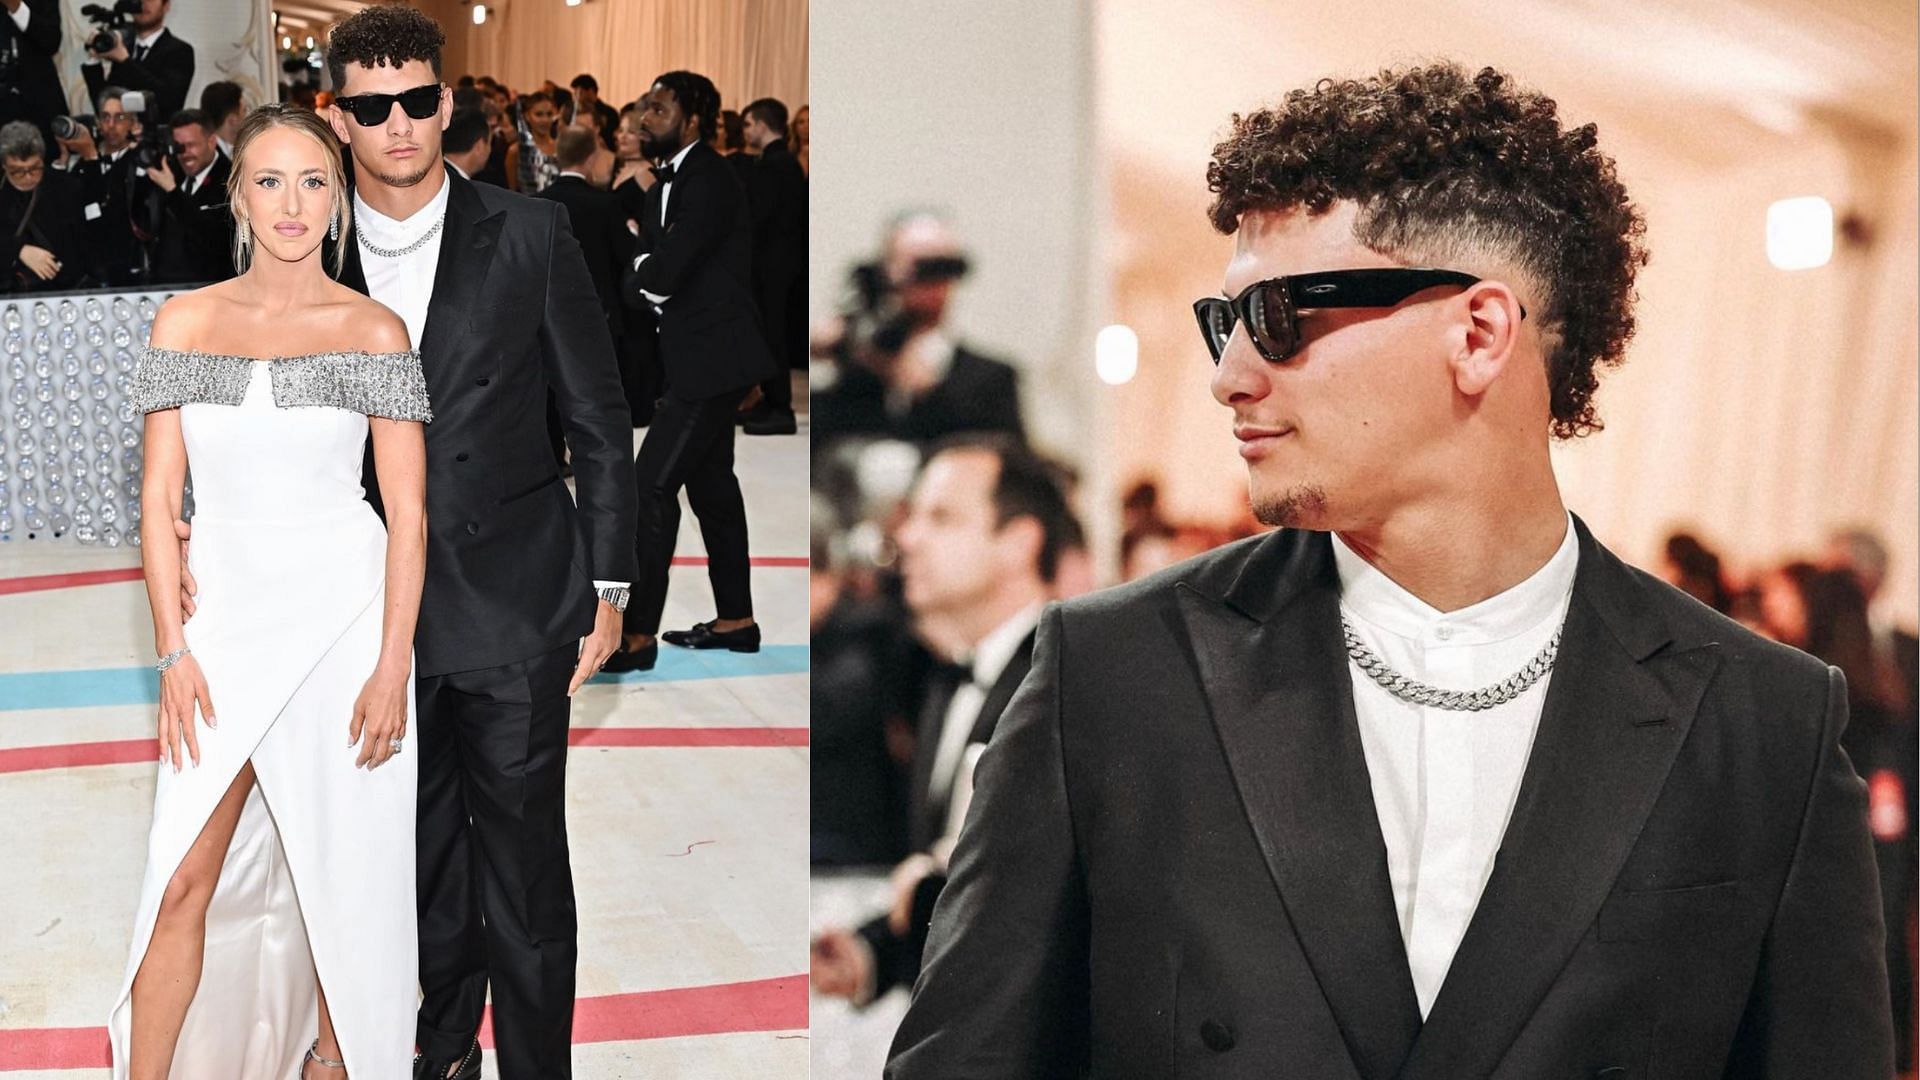 Patrick Mahomes attended the Met Gala with his wife Brittany and an expensive watch